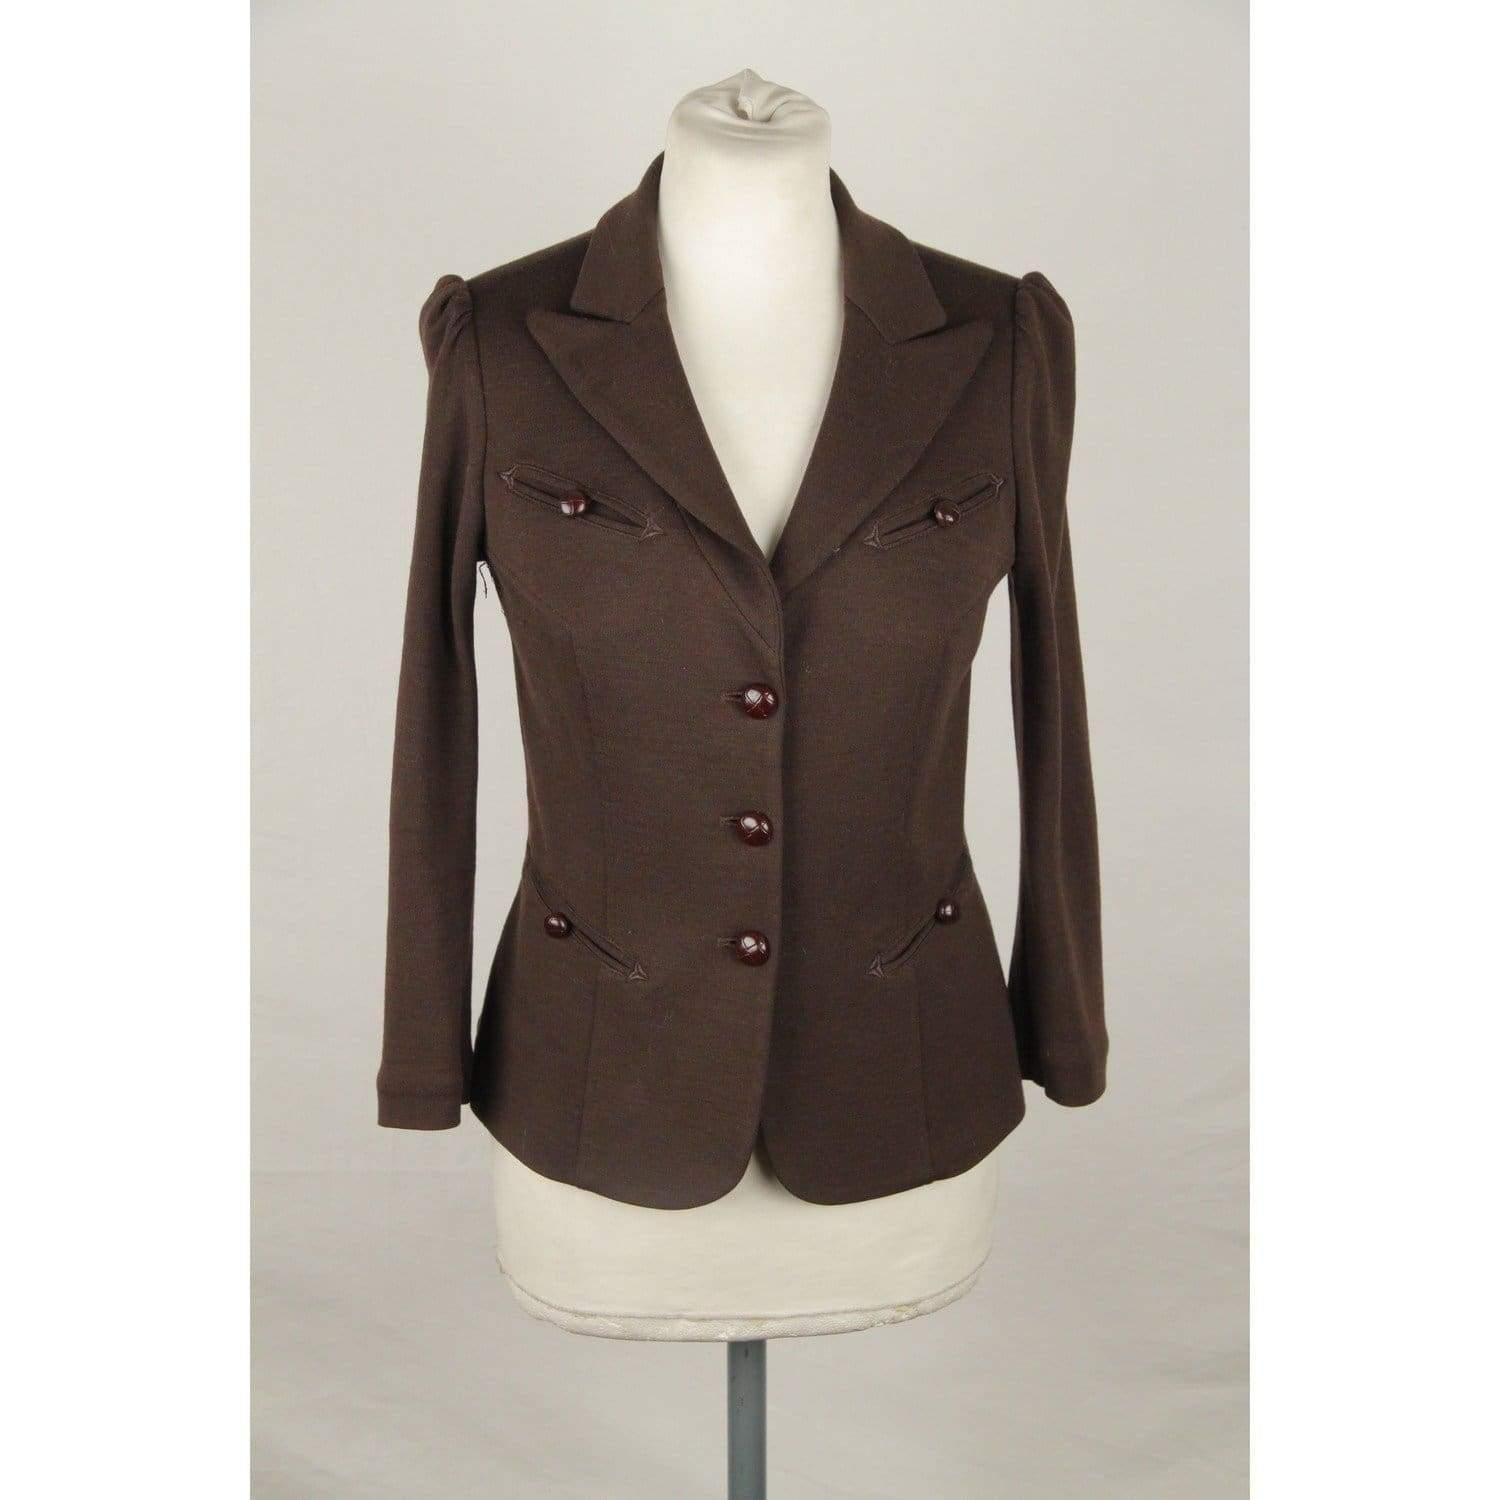 MATERIAL: Wool COLOR: Brown MODEL: Blazer GENDER: Women SIZE: Small CONDITION RATING: A :EXCELLENT CONDITION - Used once or twice. Looks mint. Imperceptible signs of wear CONDITION DETAILS: Gently used MEASUREMENTS: SHOULDER TO SHOULDER: 14 inches -